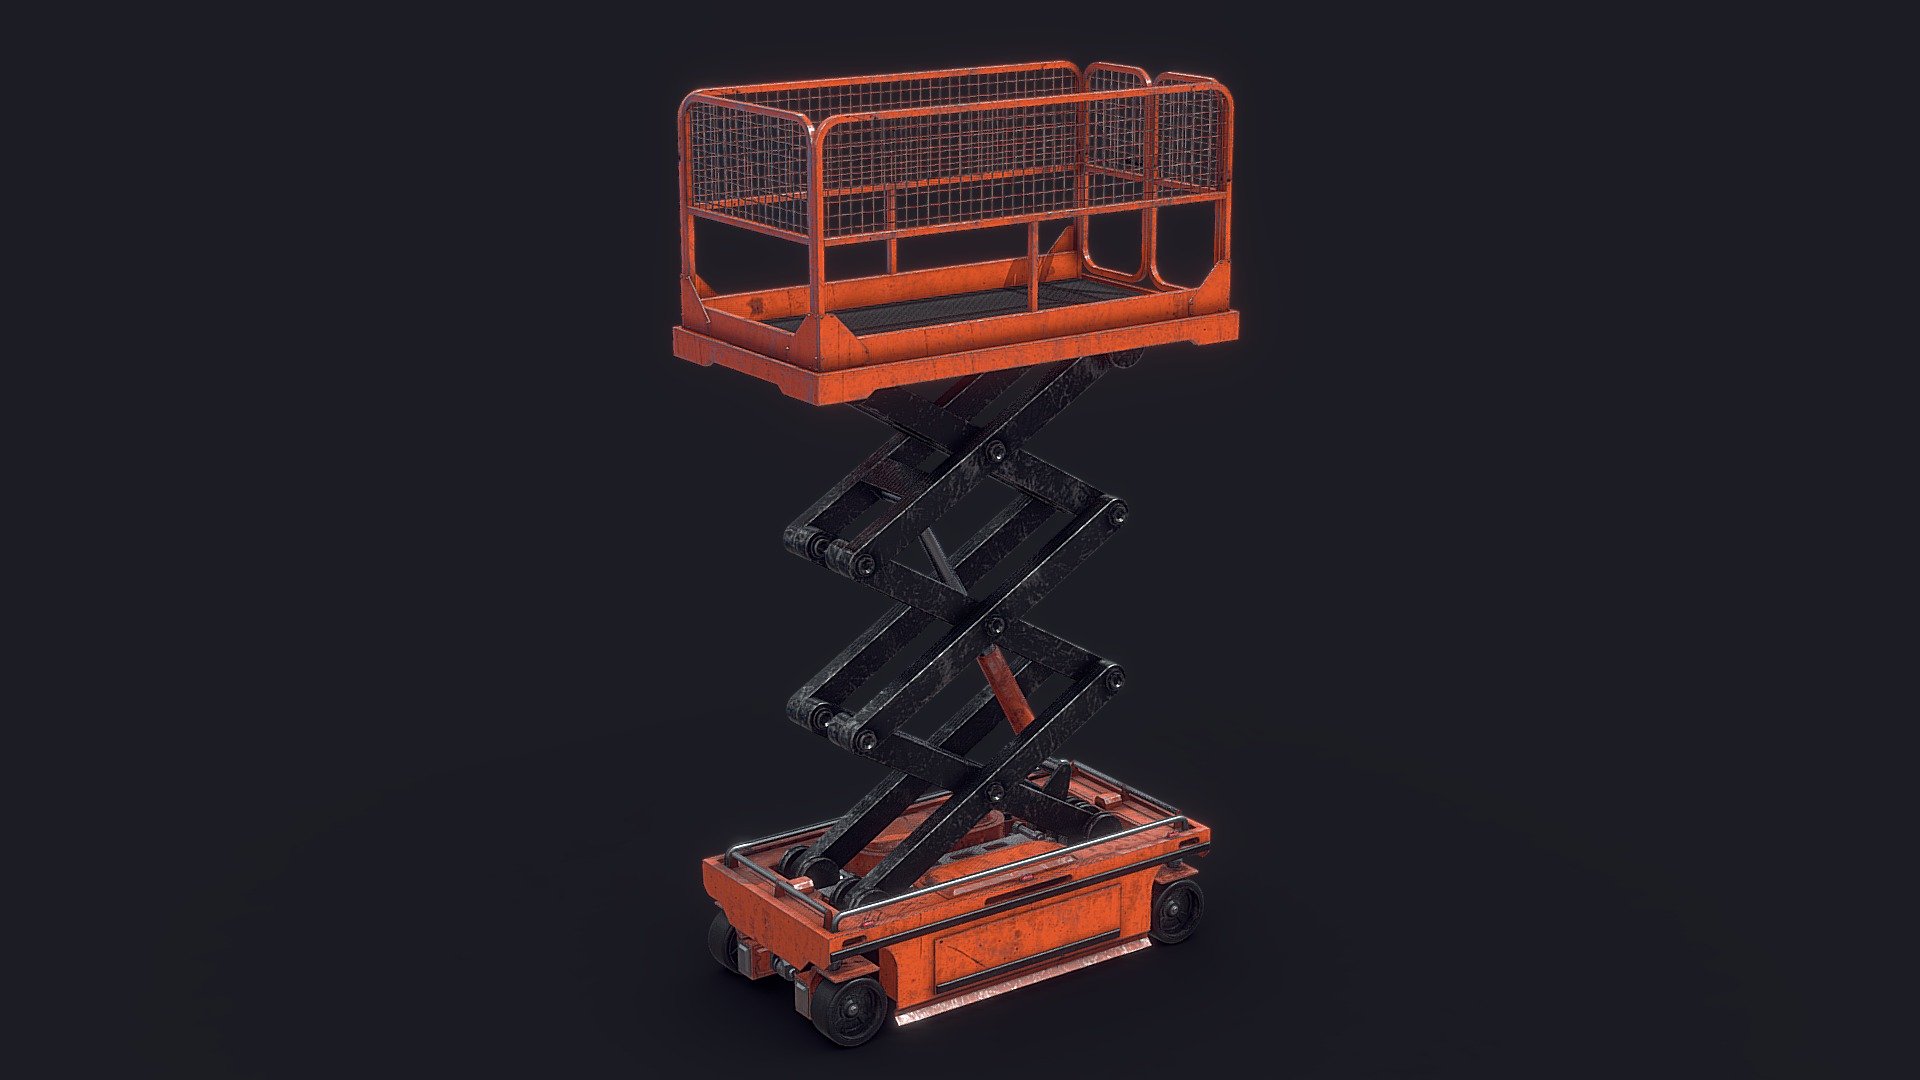 Orange movable scissor freight lift with slitghy damages.

Specification:




Model is in a real scale

Height: 380cm

Polygons: 285754

Verticles: 148212

Only Quads and Triangles used

Non-overlapping UV mapping

Formats:




3ds max 2017 V-Ray (native)

3ds max 2017 Arnold

Cinema R20

Cinema R20 V-Ray

Blender Cycles

FBX

OBJ
 - Scissor Freight Lift II - Buy Royalty Free 3D model by Fusemesh 3d model